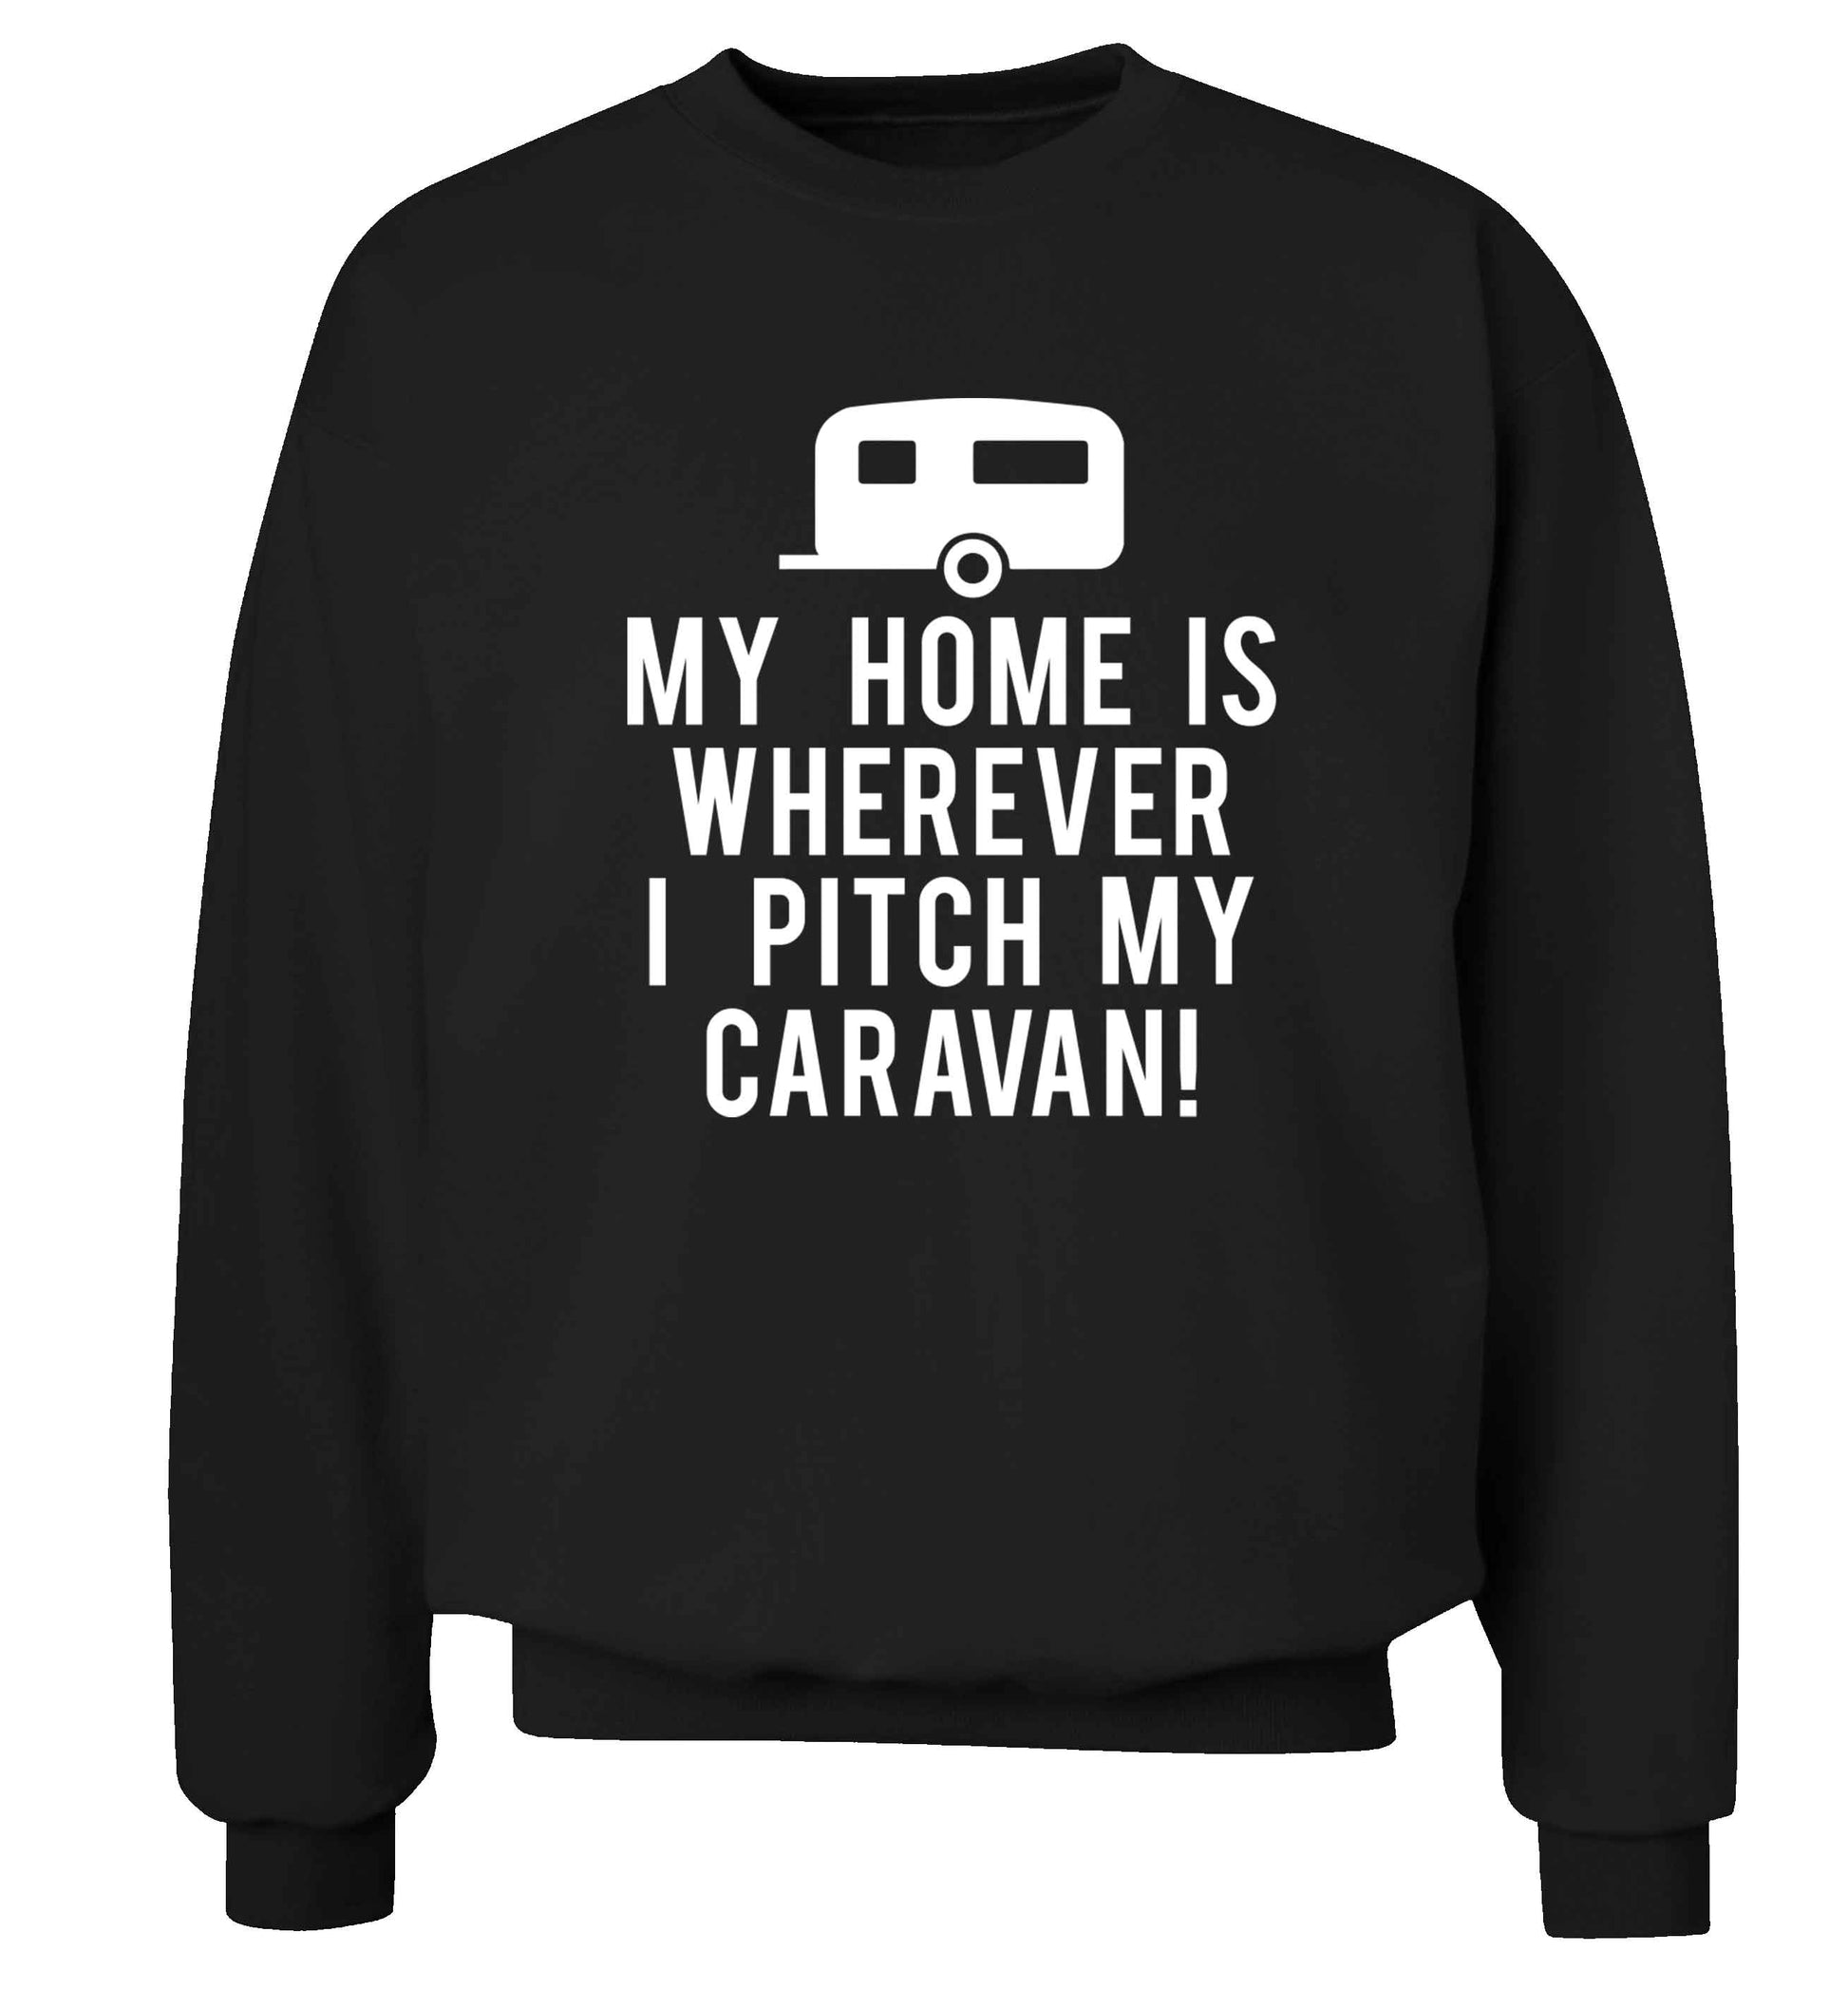 My home is wherever I pitch my caravan Adult's unisex black Sweater 2XL